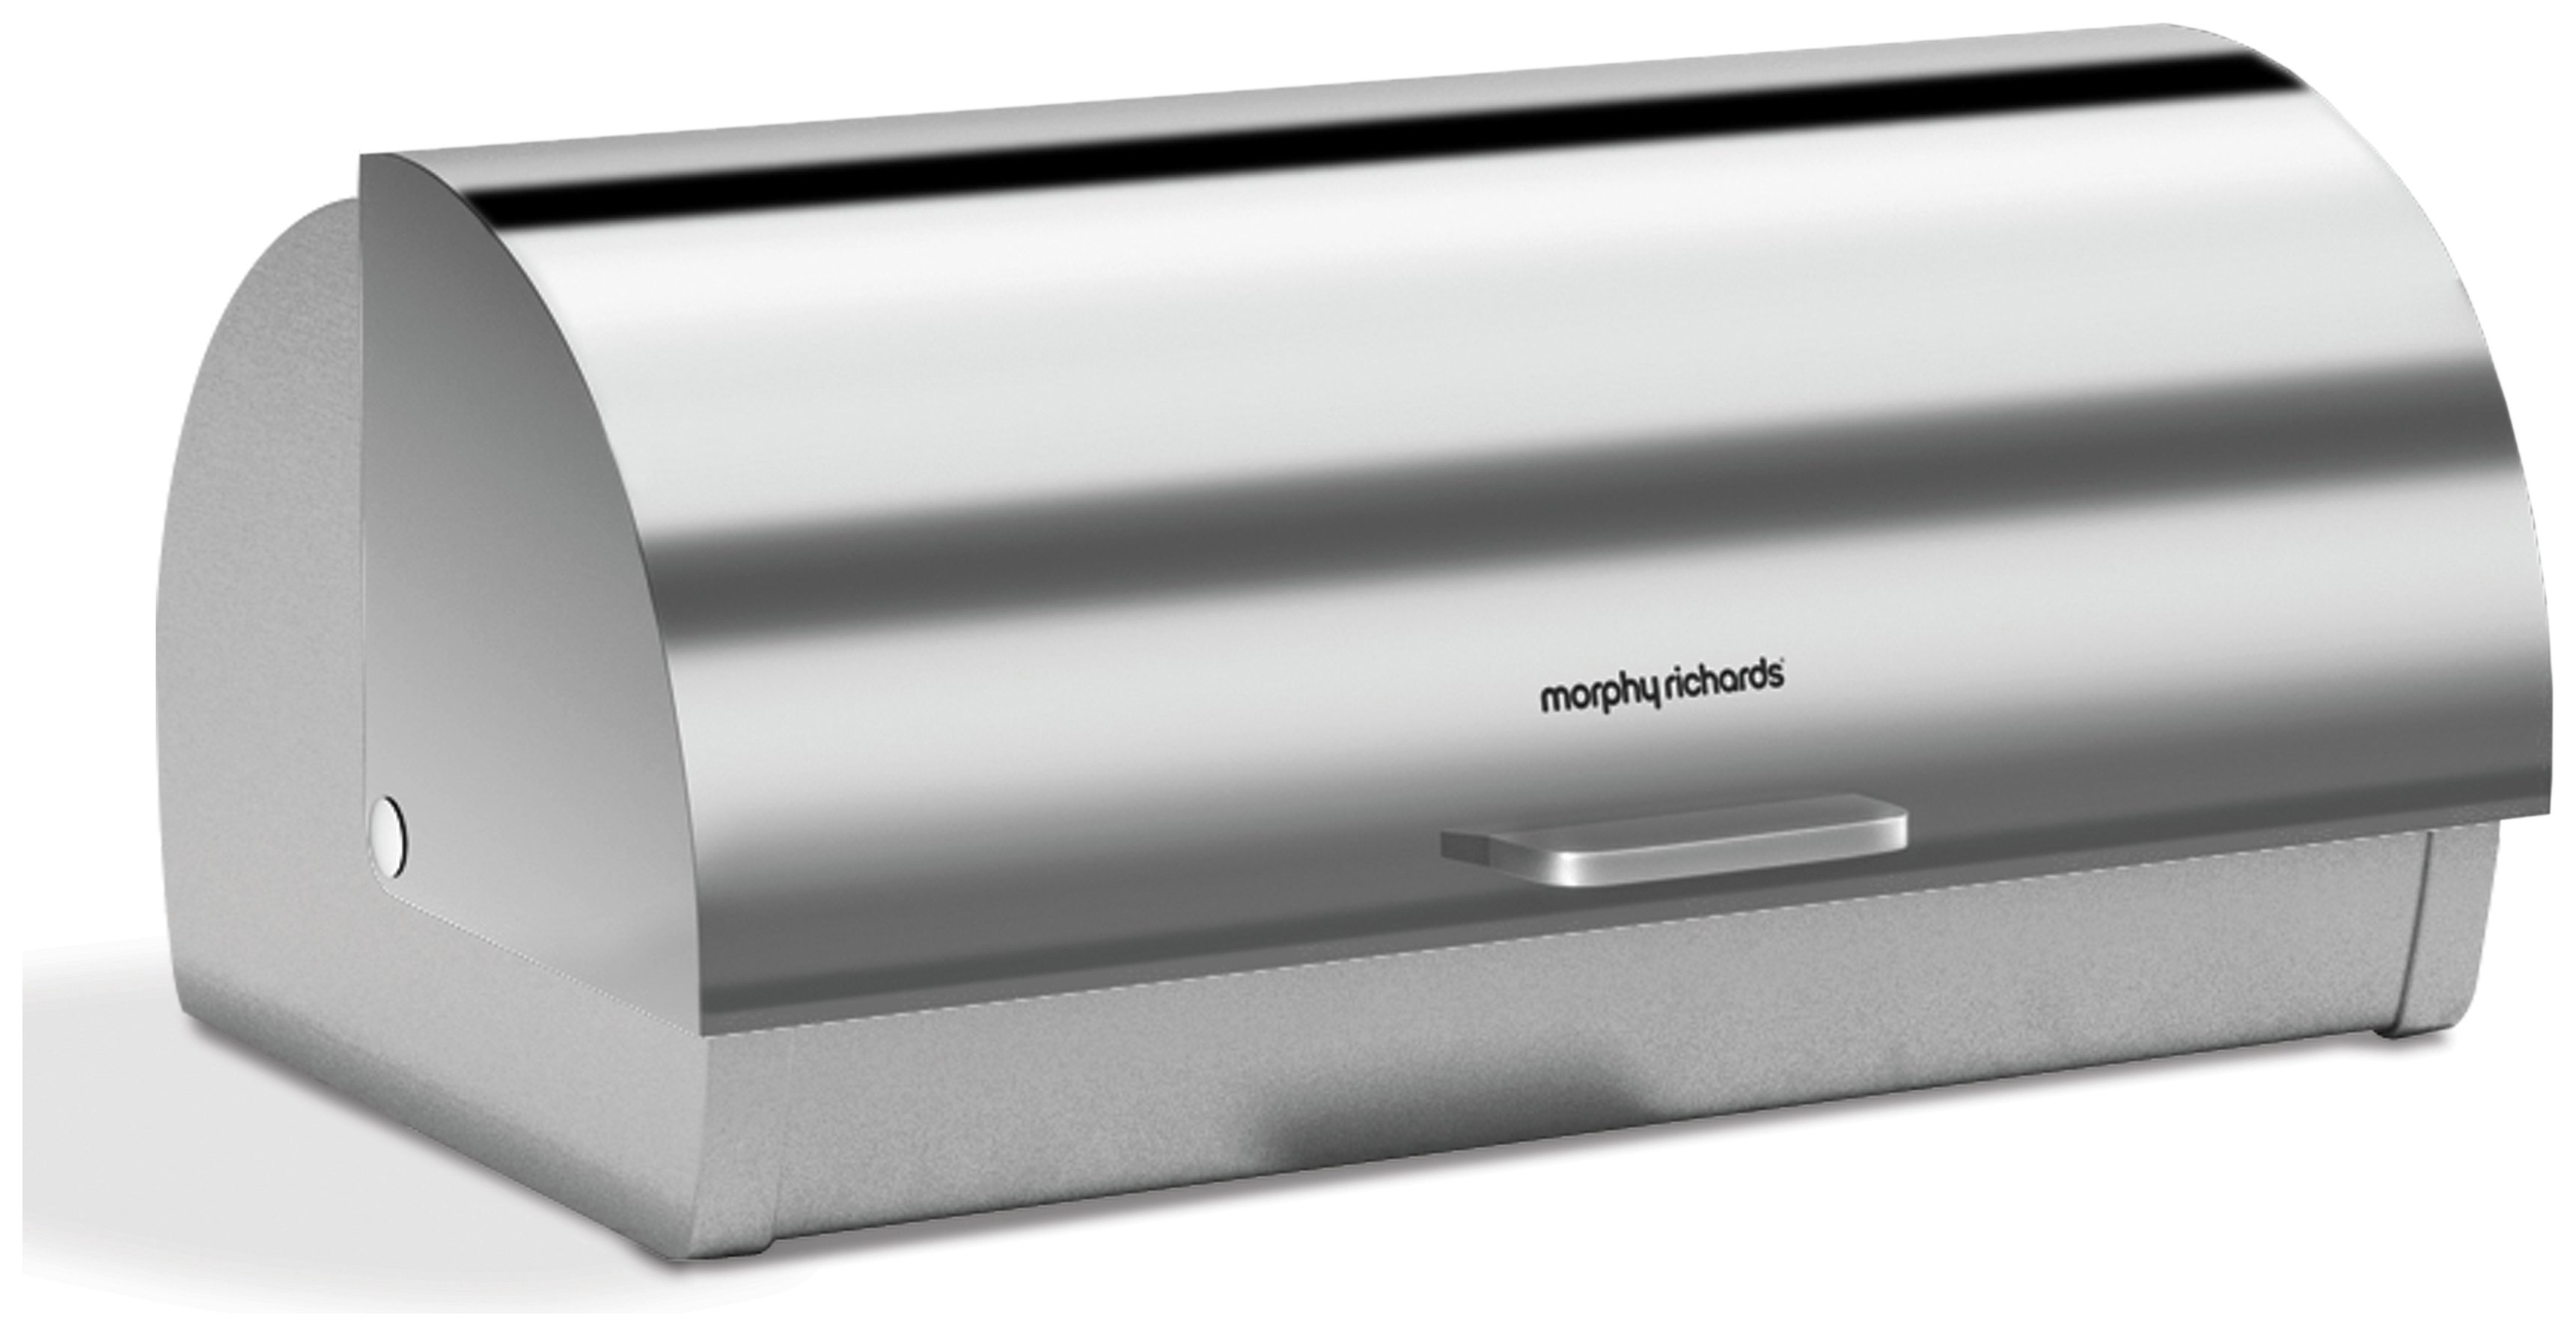 Morphy Richards Accents Roll Top Bread Bin - Stainless Steel